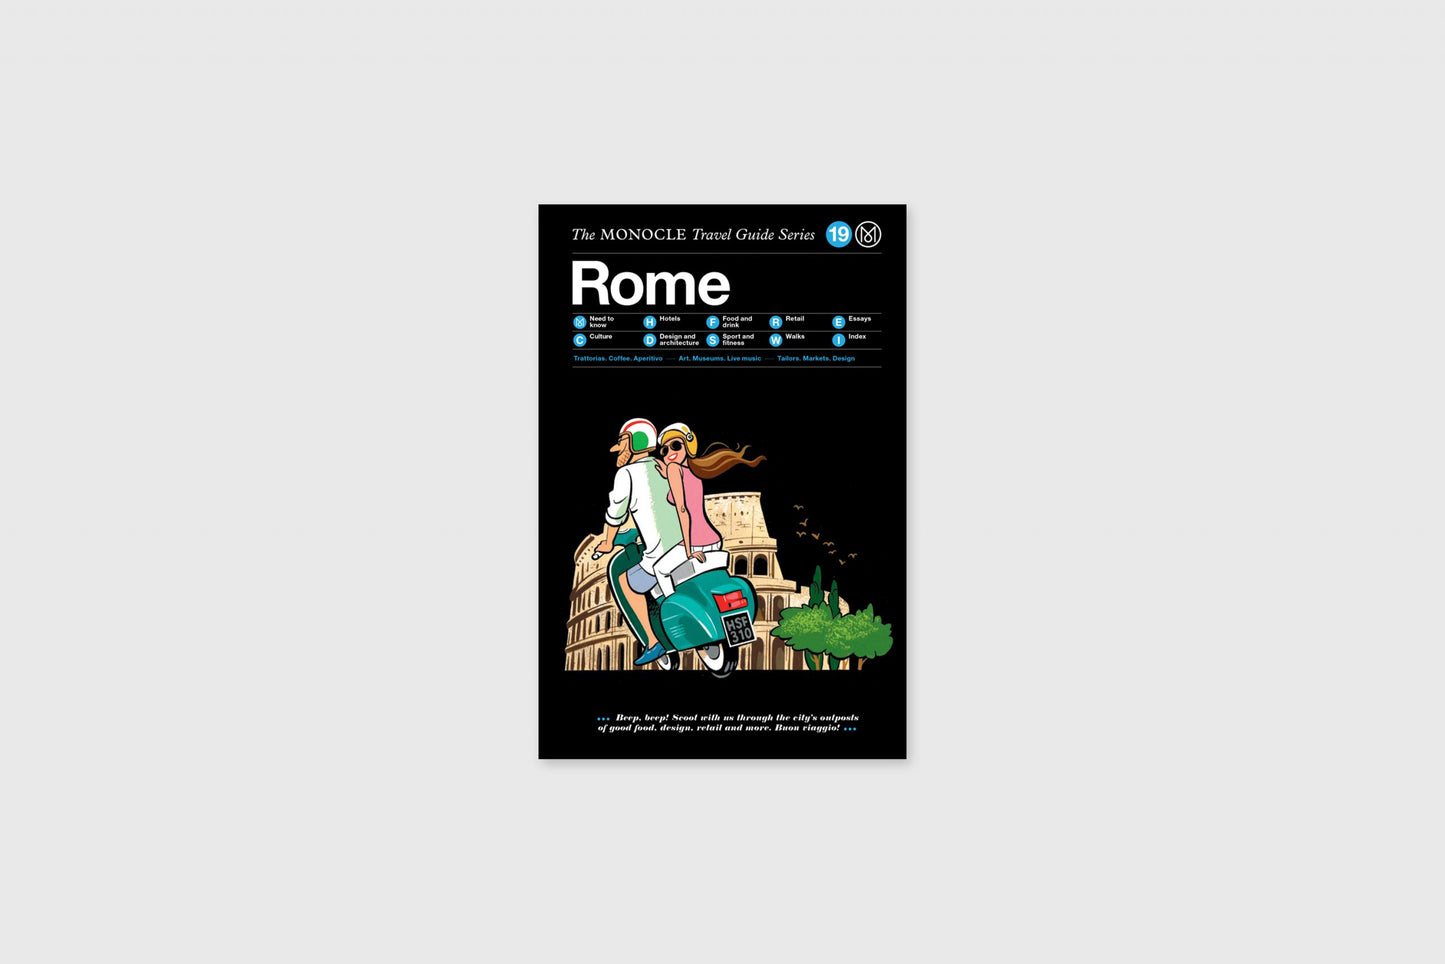 Rome: The Monocle Travel Guide Series